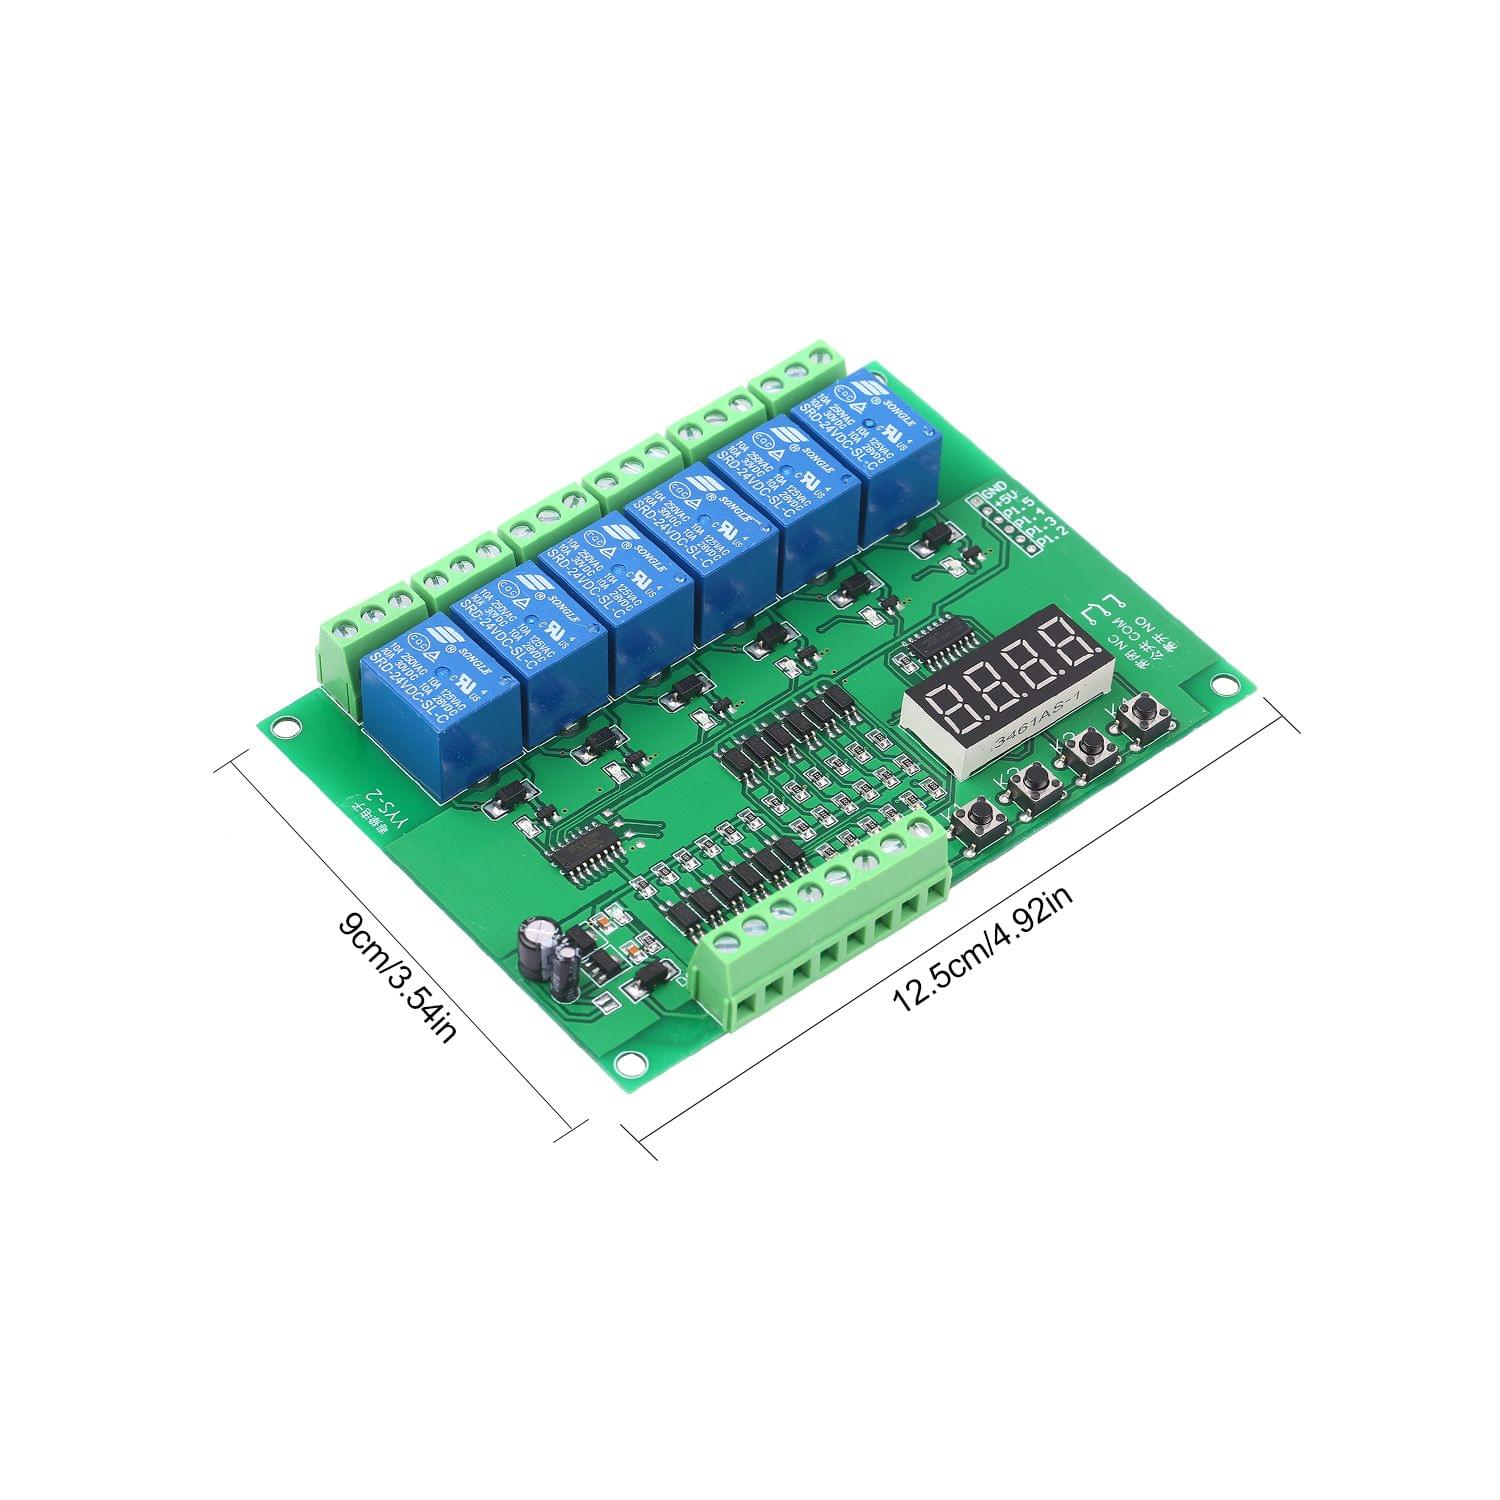 DC 24V Programmable 6-Channel Relay Module Timing Cycle Time - DC 24V